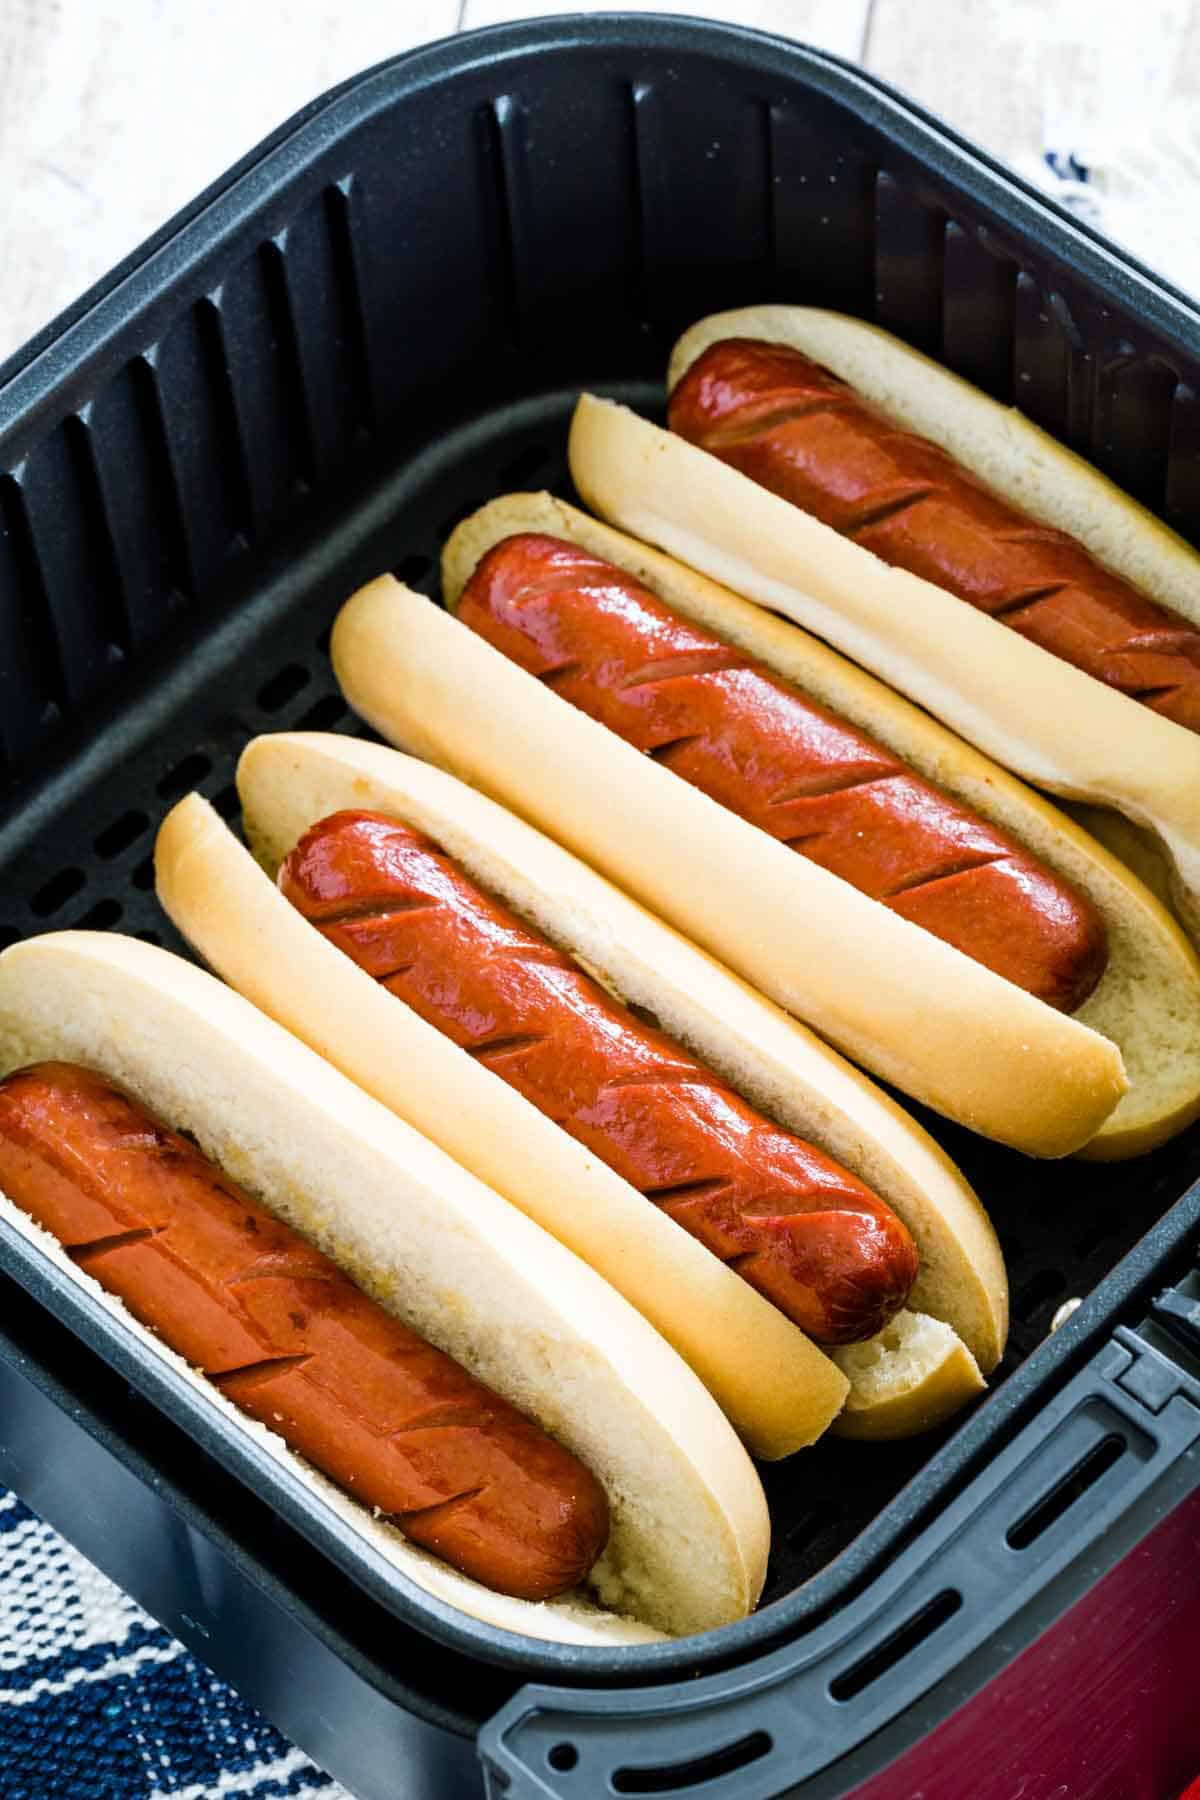 Hot dogs toast in buns in an air fryer.